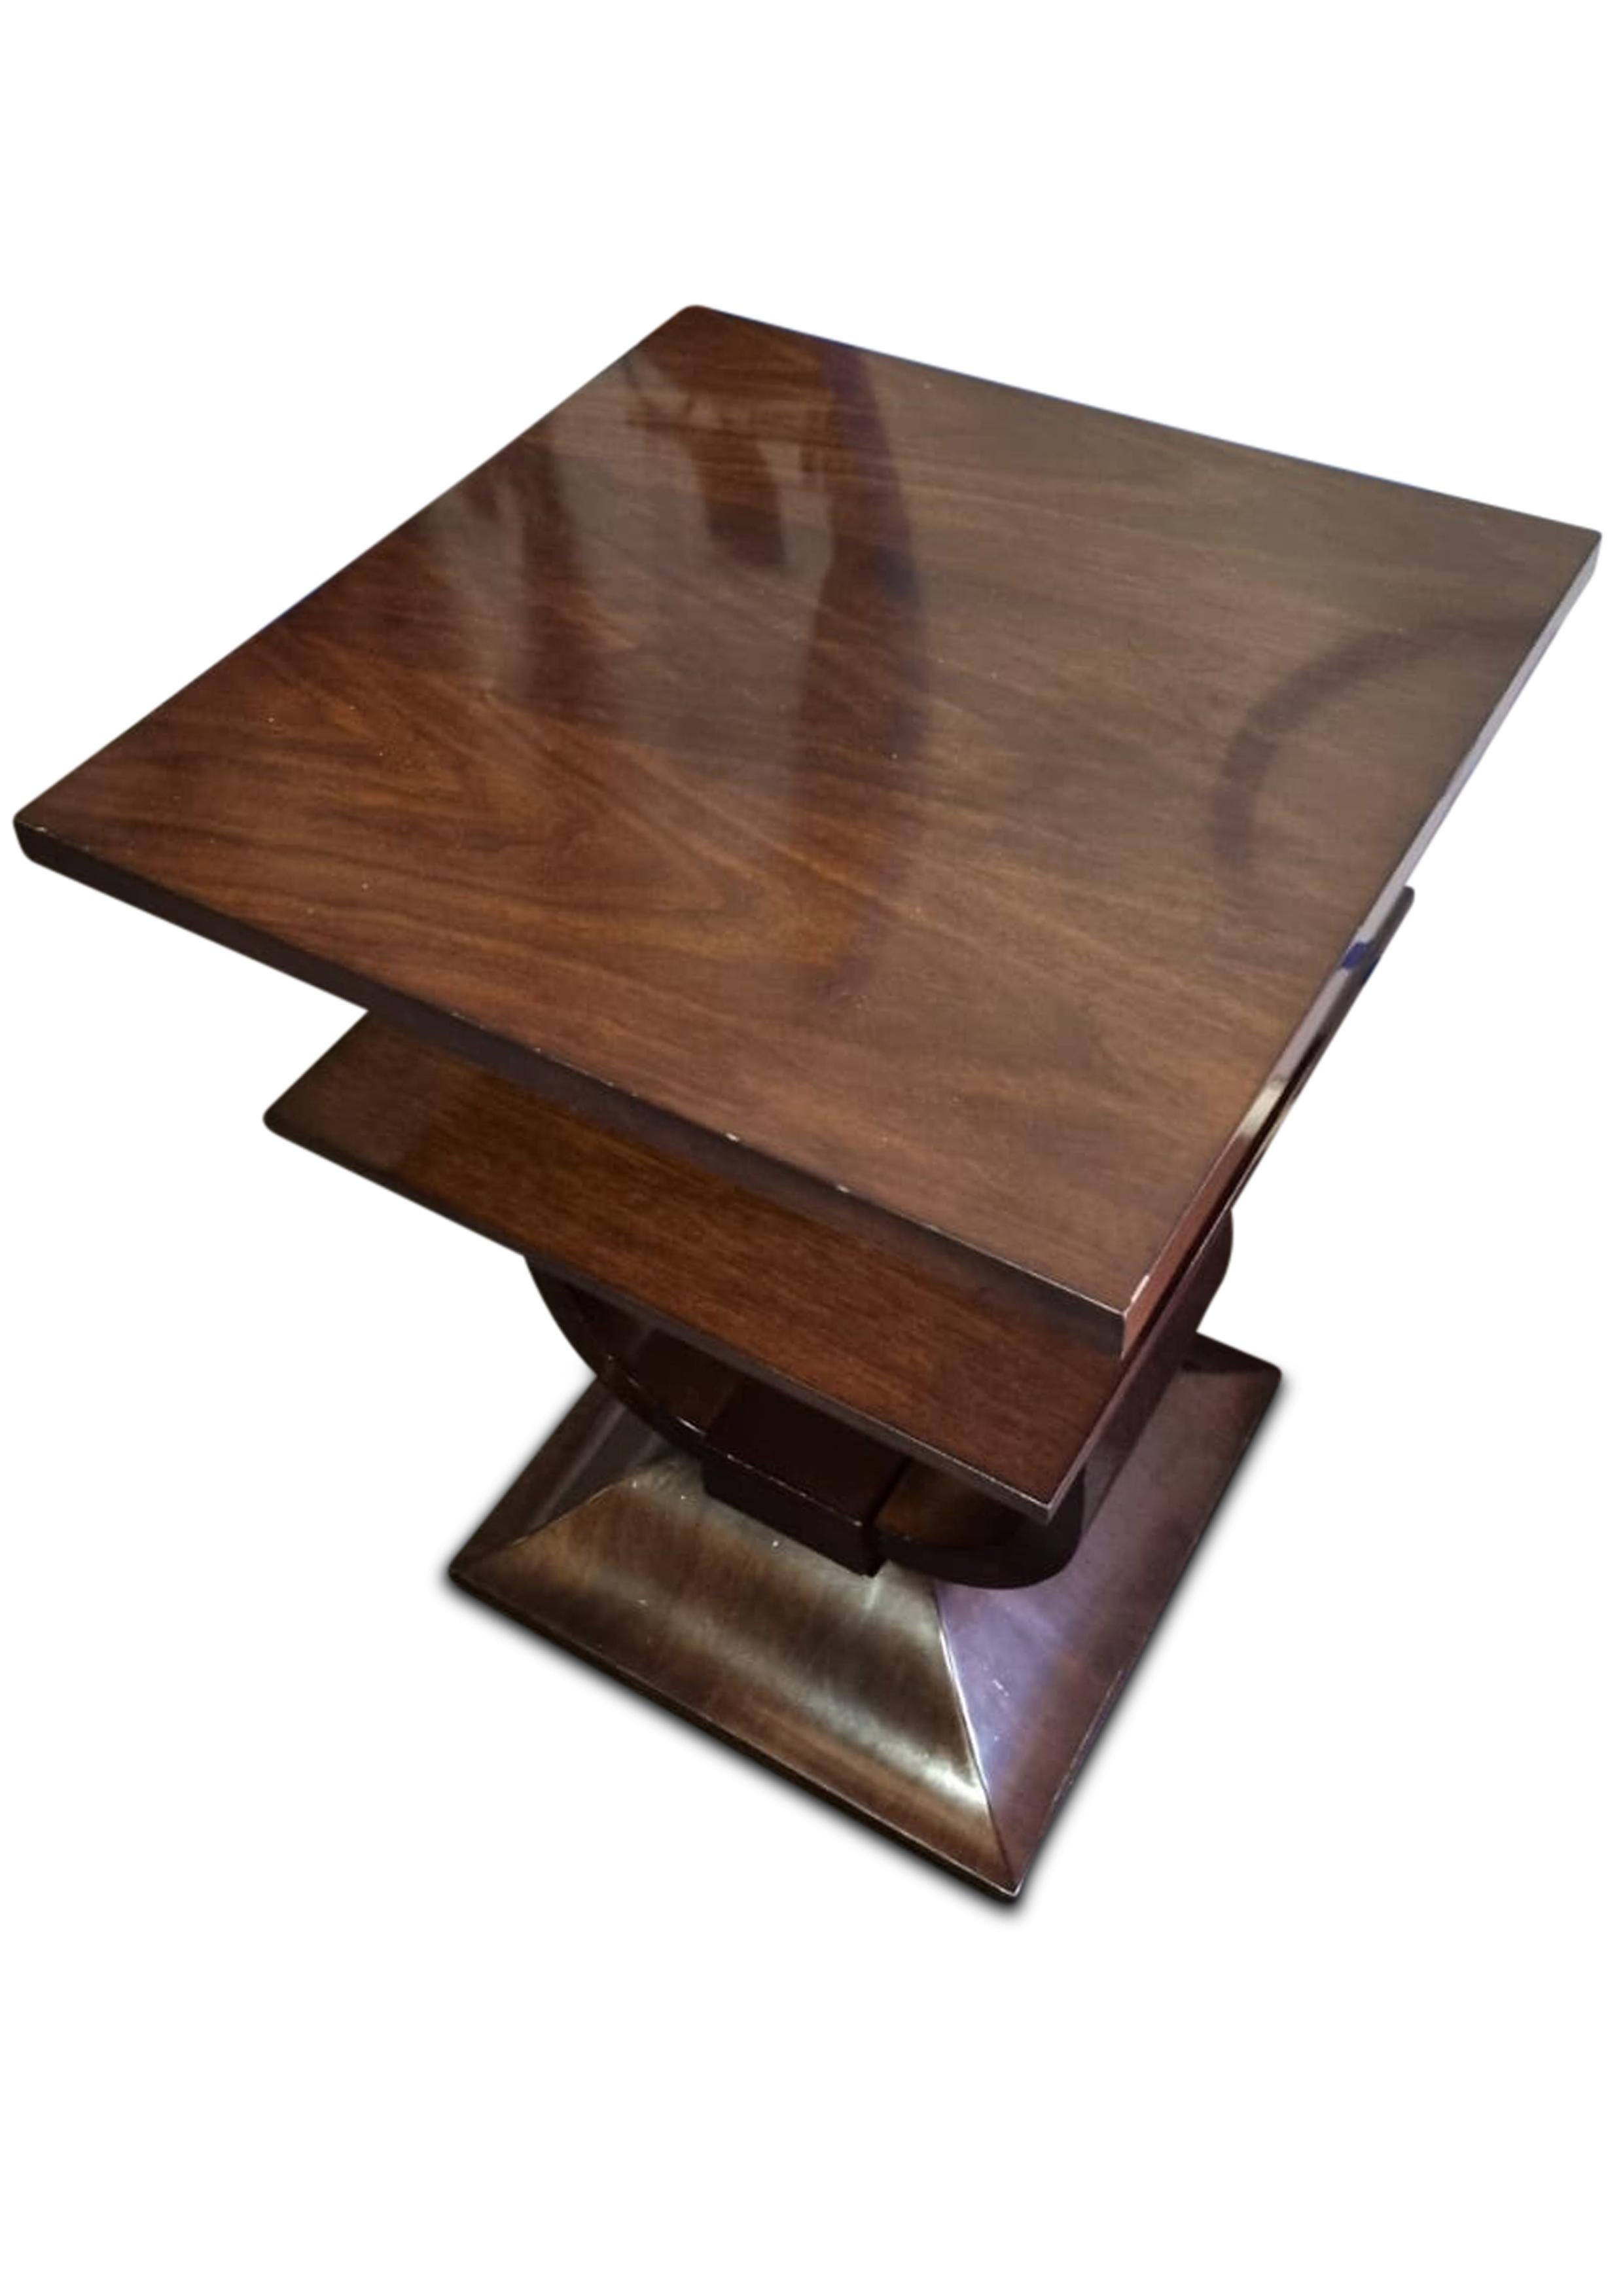 Art Deco Design Elegant Burr Walnut Three Tiered Side Table  In Good Condition For Sale In High Wycombe, GB